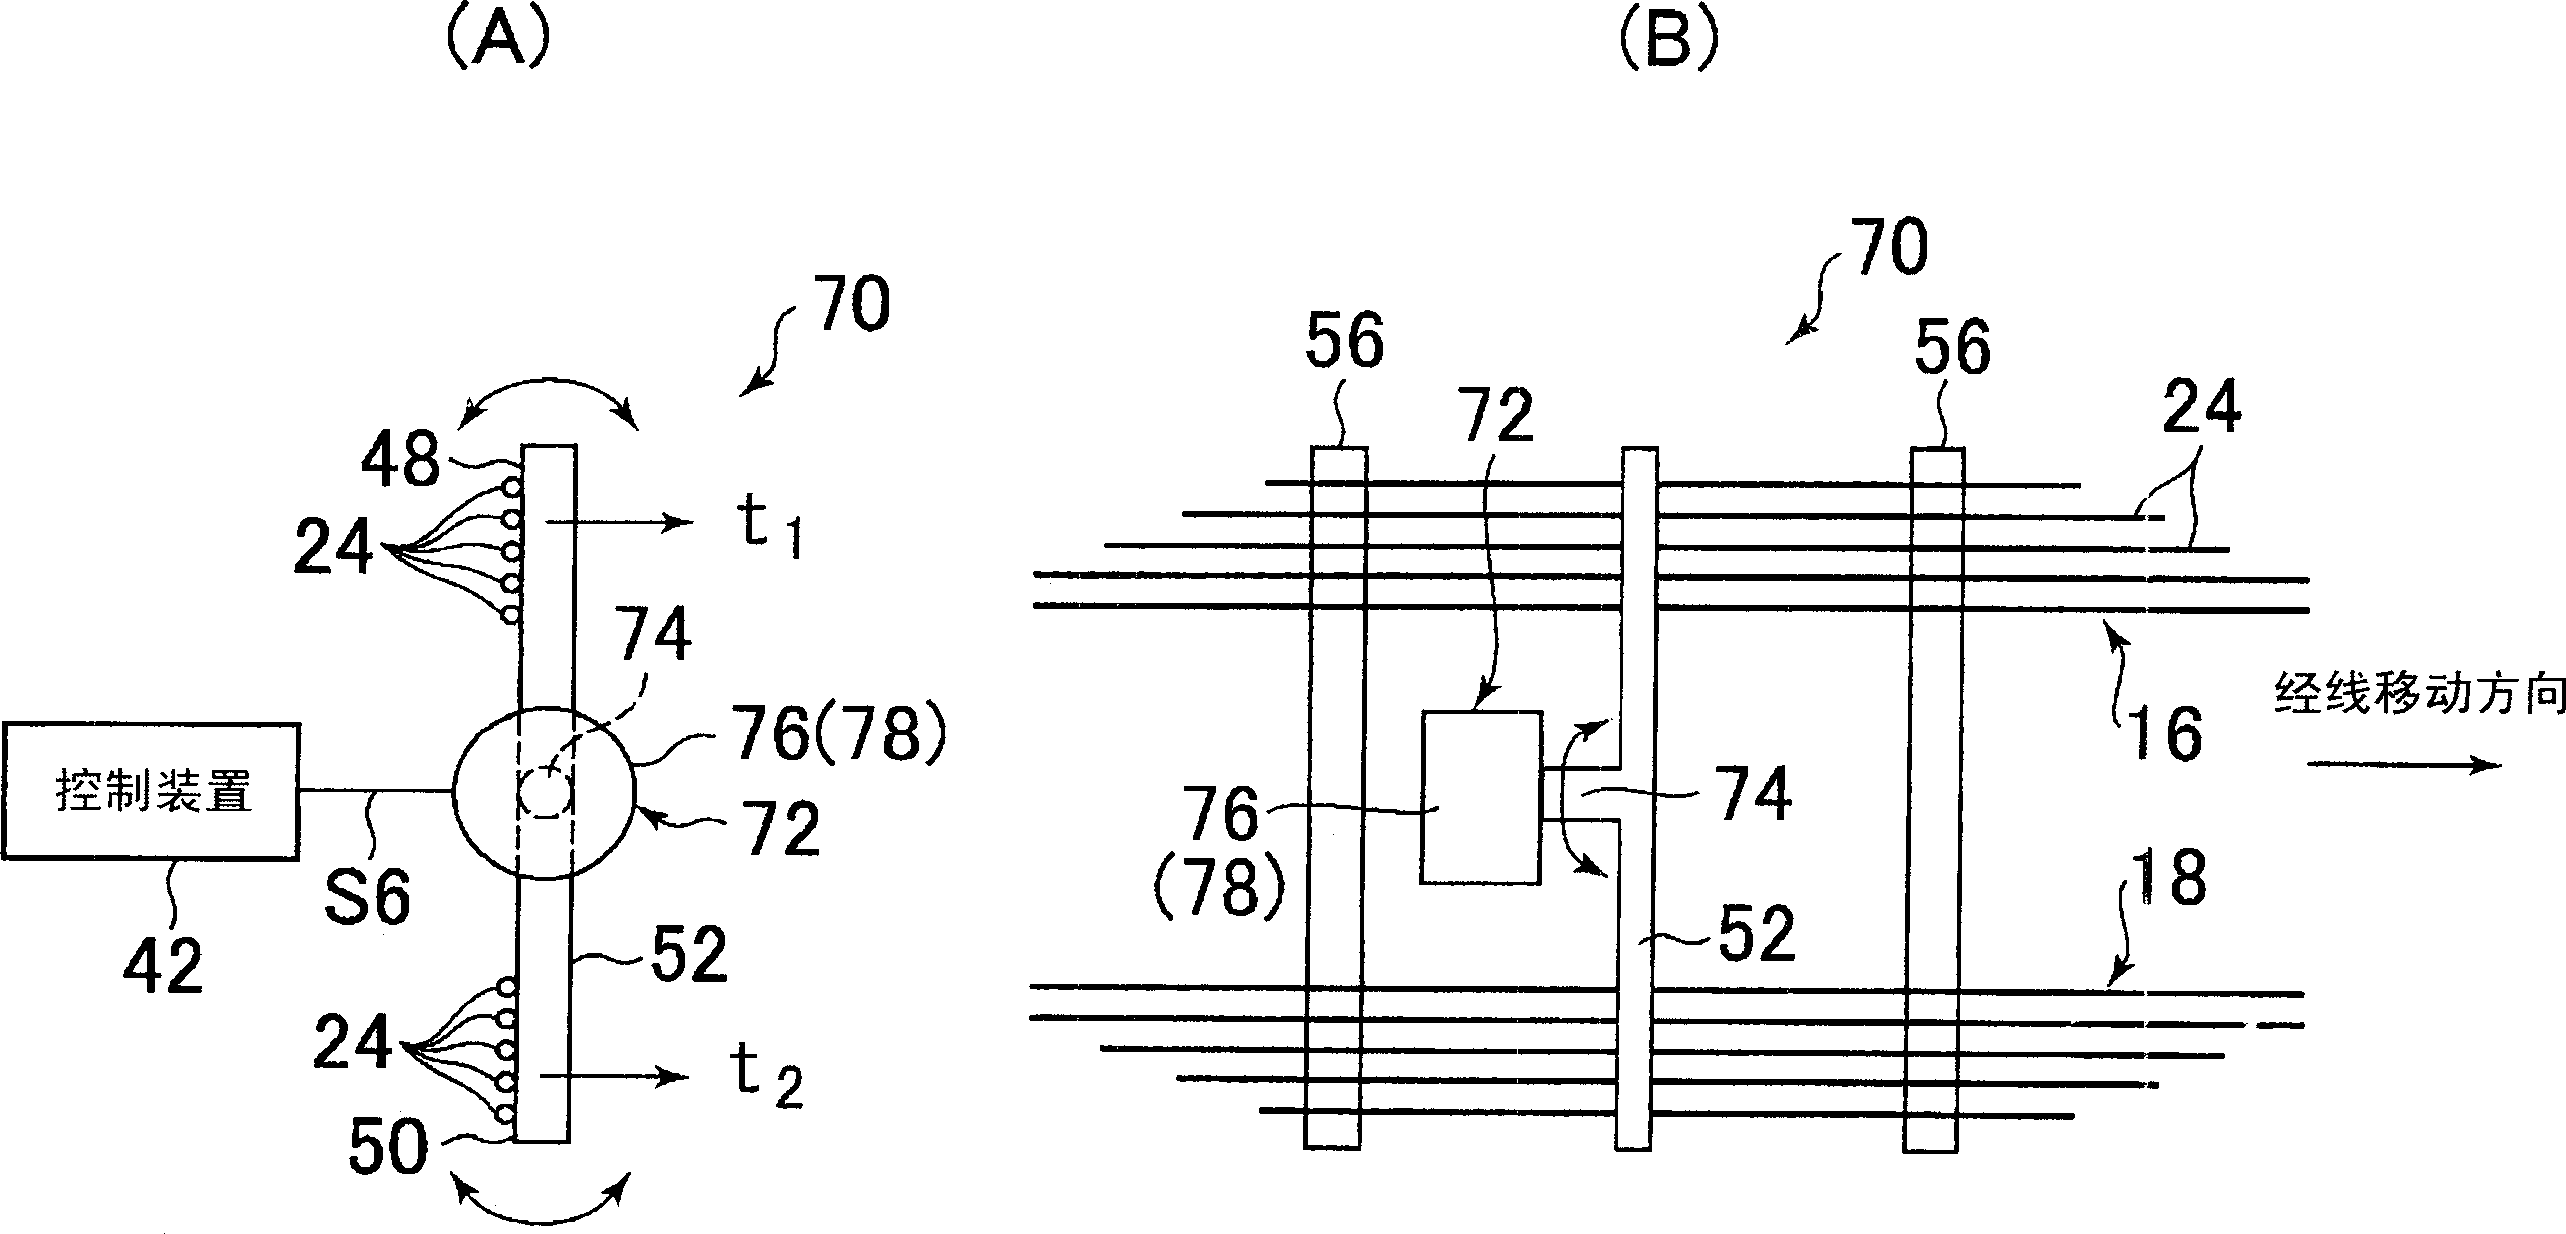 Device for detecting difference in warp tension of a loom